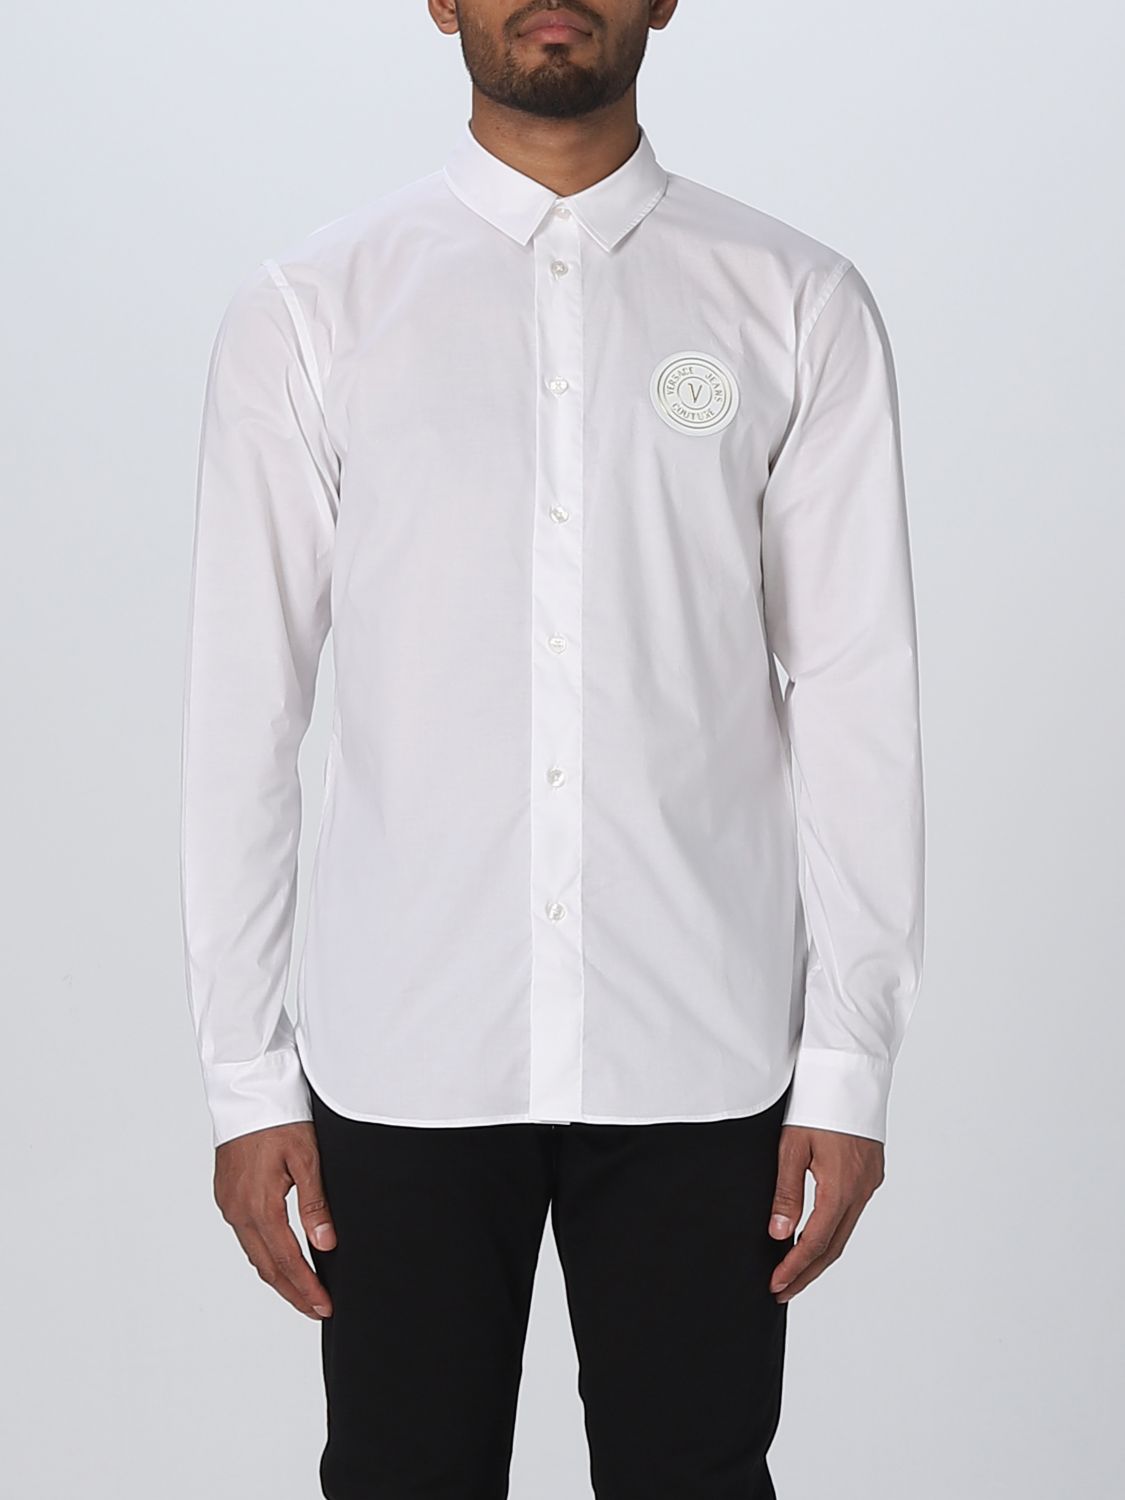 VERSACE JEANS COUTURE: shirt for man - White | Versace Jeans Couture ...